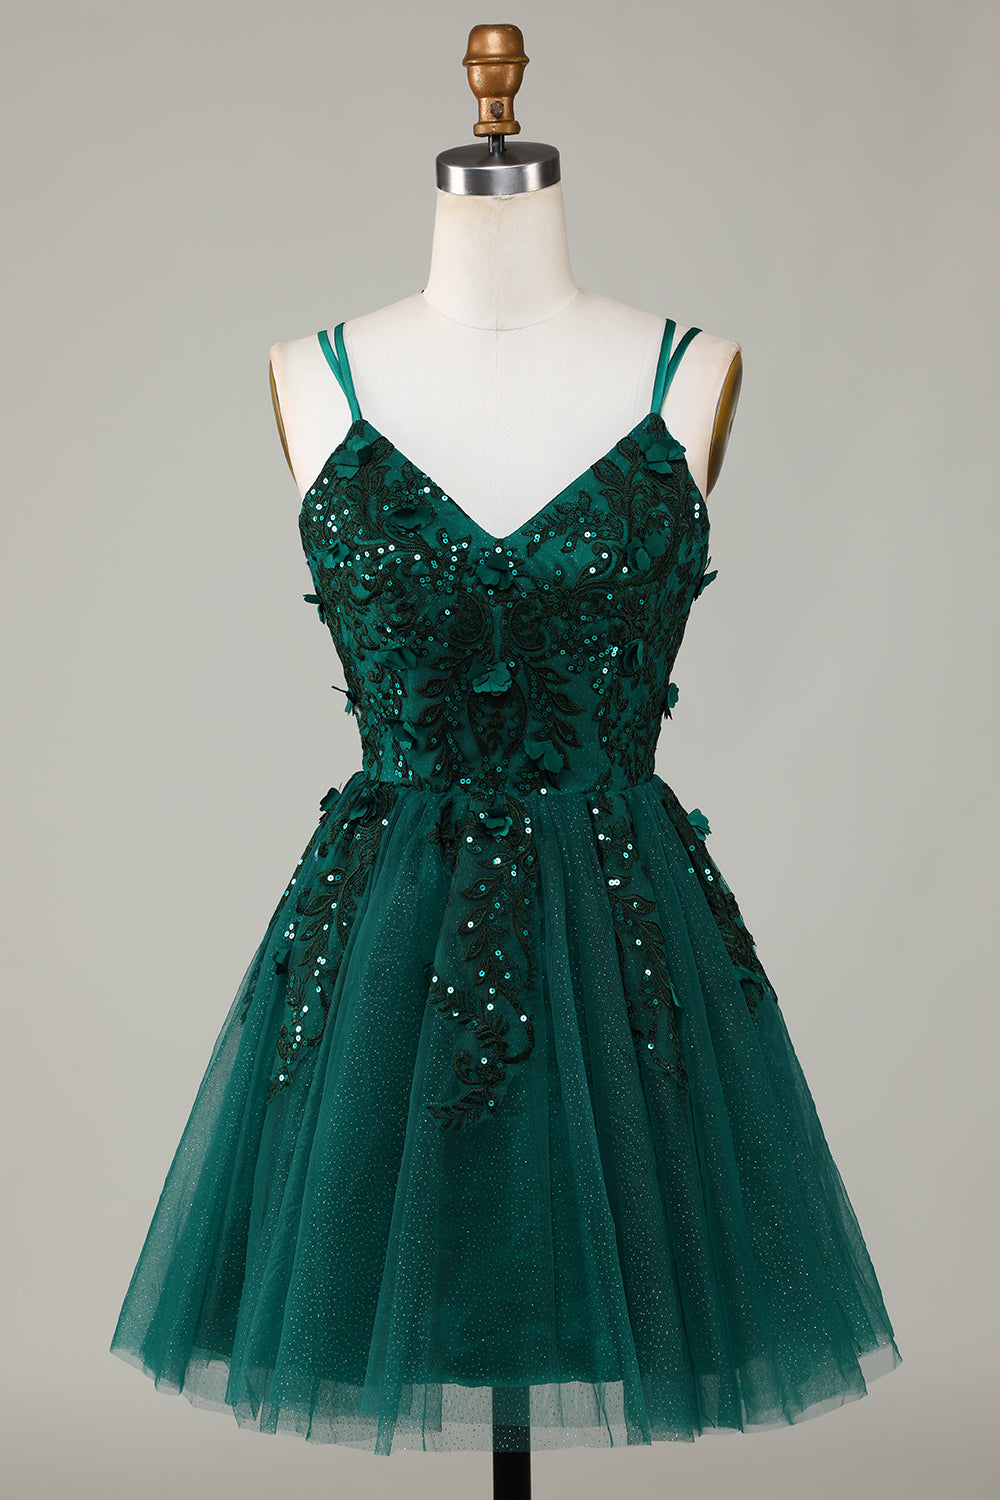 Stylish A Line Spaghetti Straps Dark Green Short Homecoming Dress with Appliques Beading